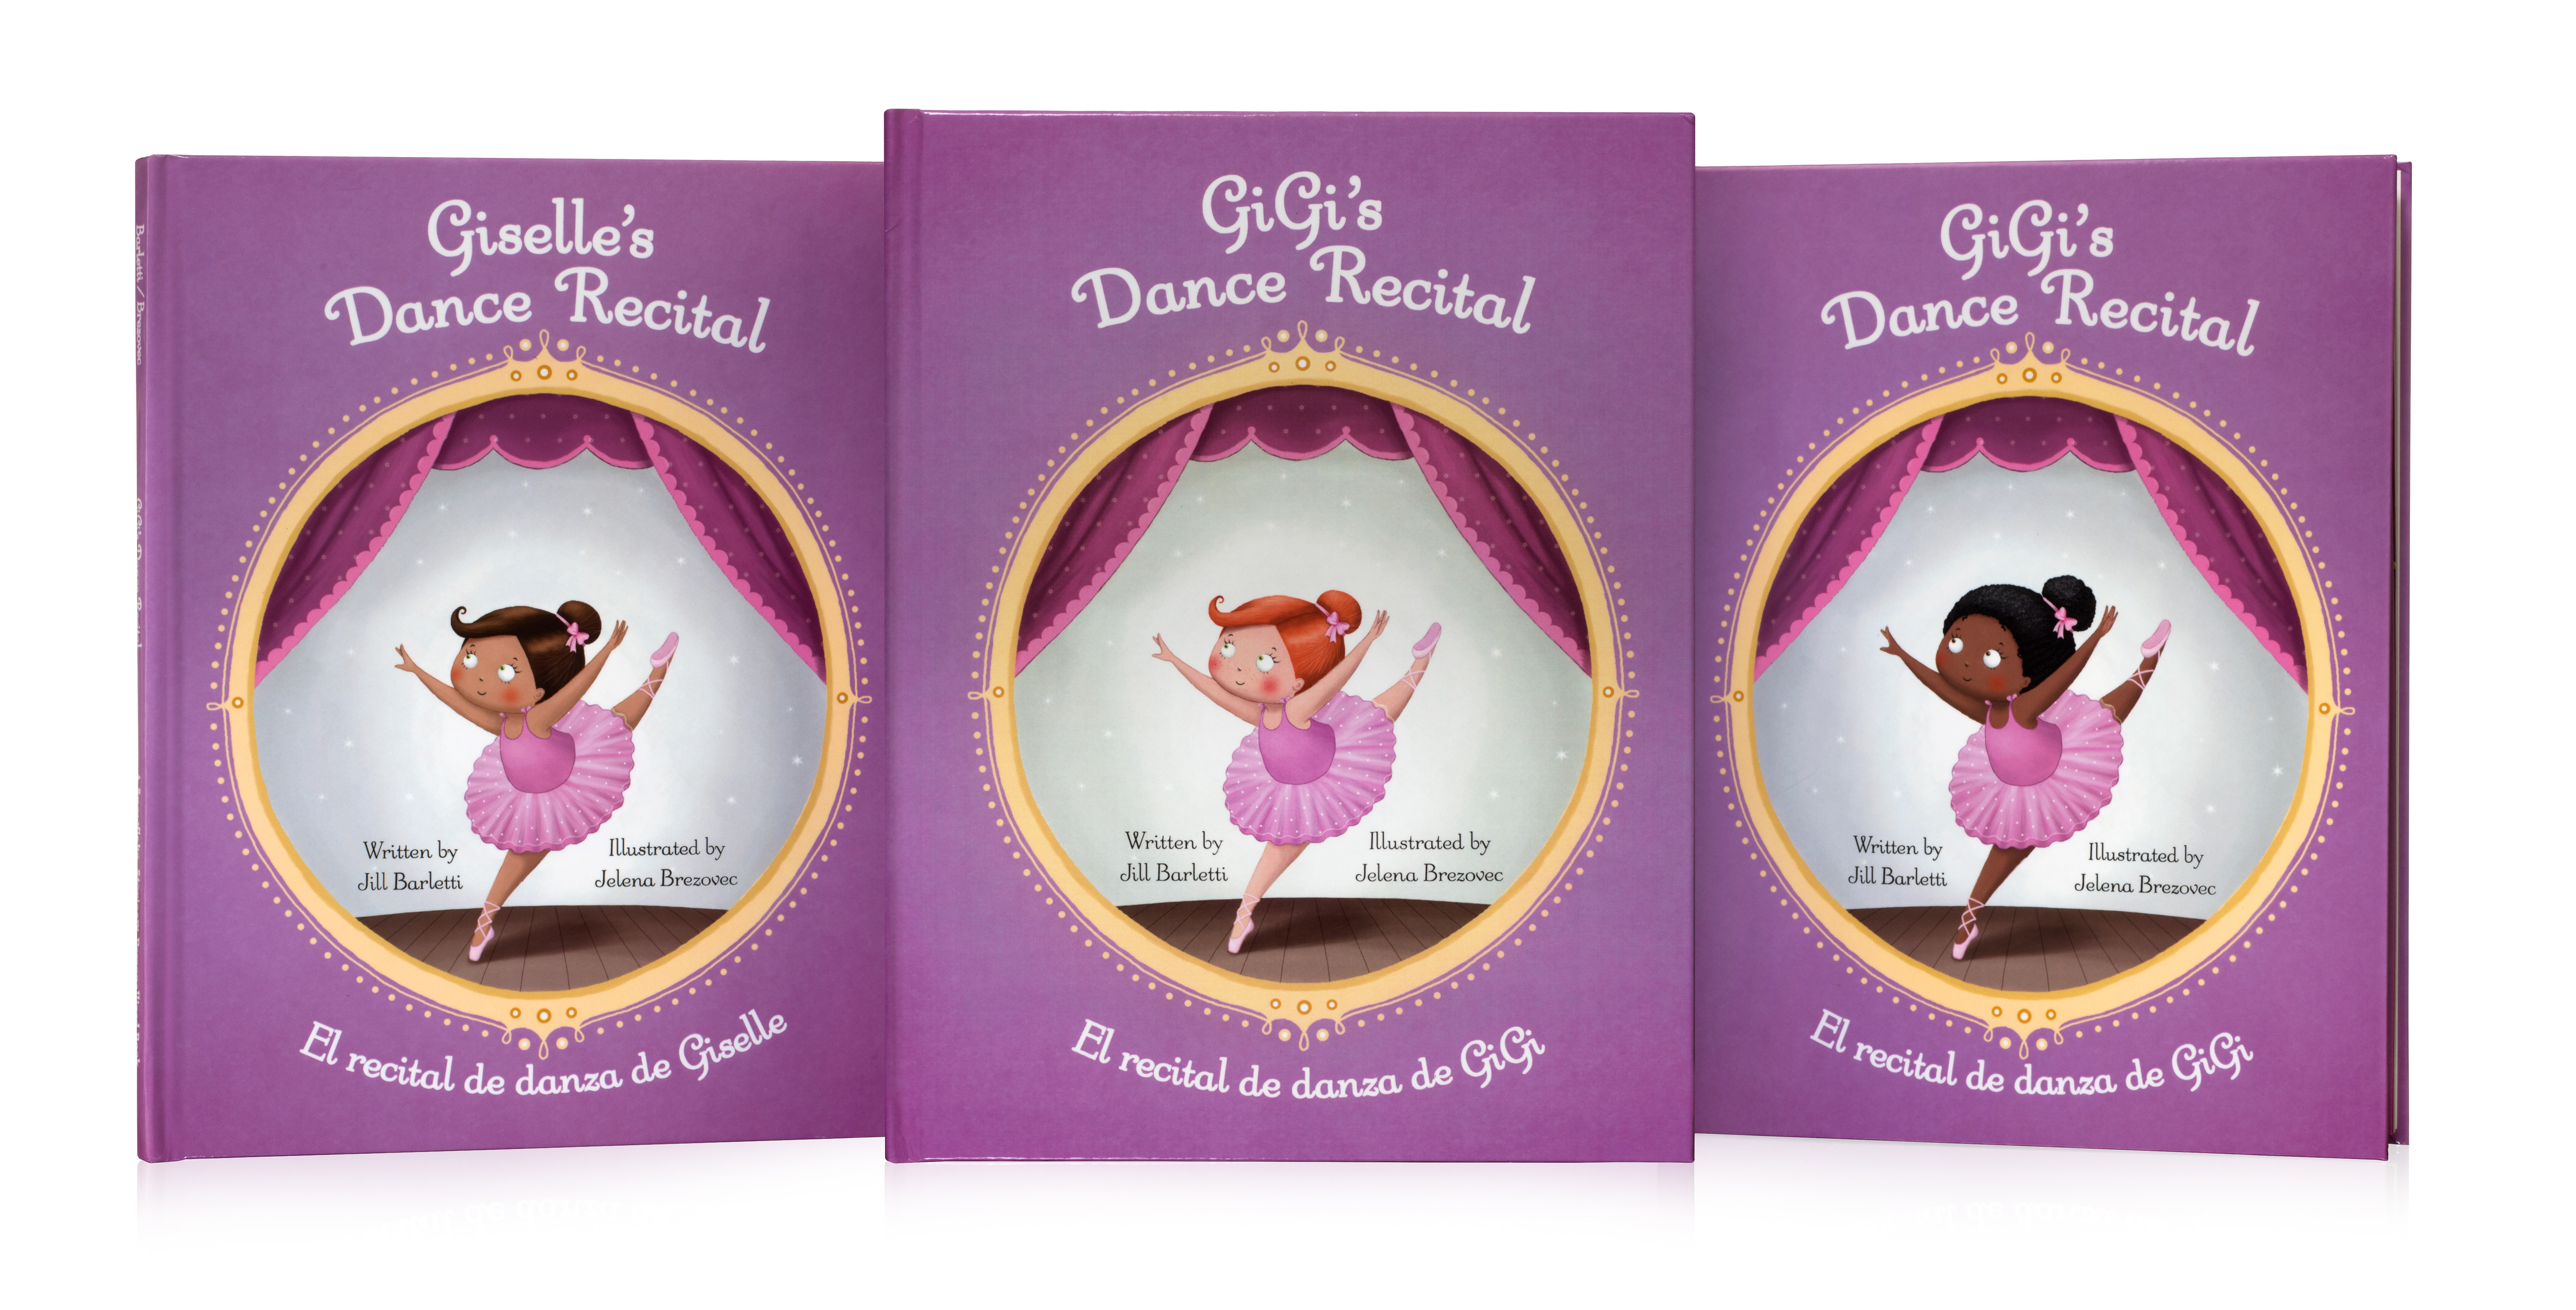 Dance Recital, a bilingual personalzed children's book from Snowflake Stories